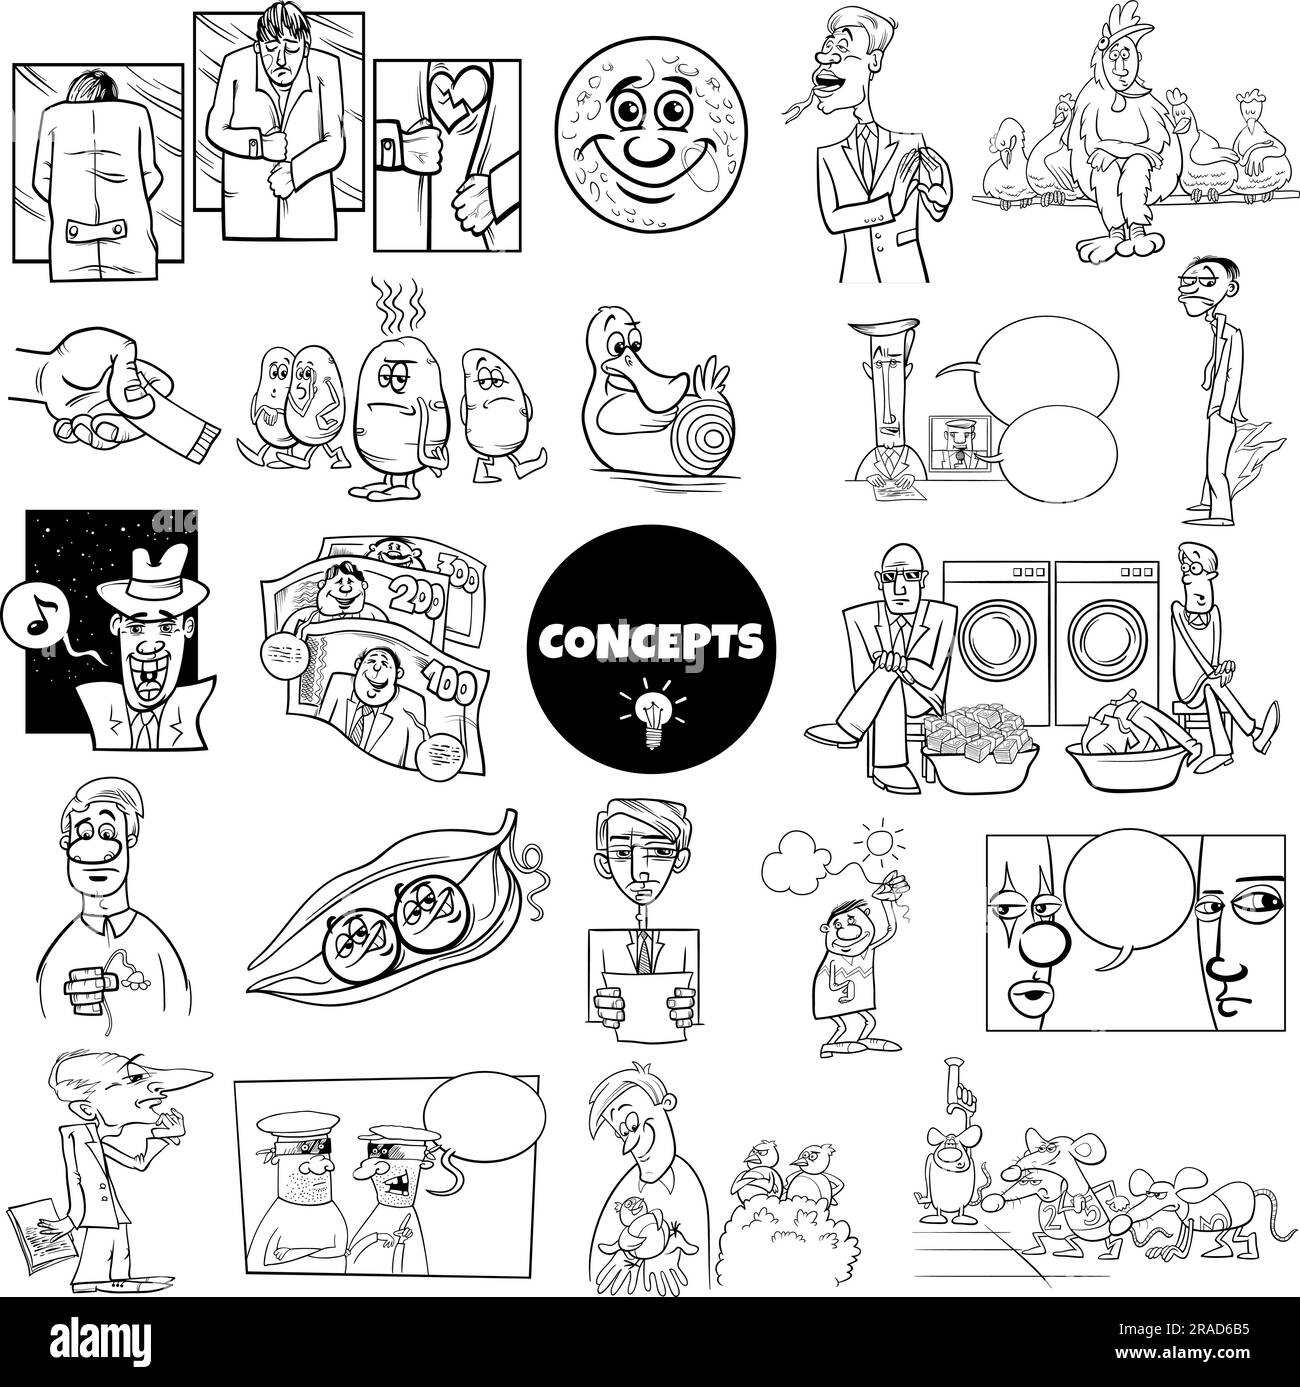 Black and white ilustration set of humorous cartoon concepts or metaphors and ideas with comic characters Stock Vector